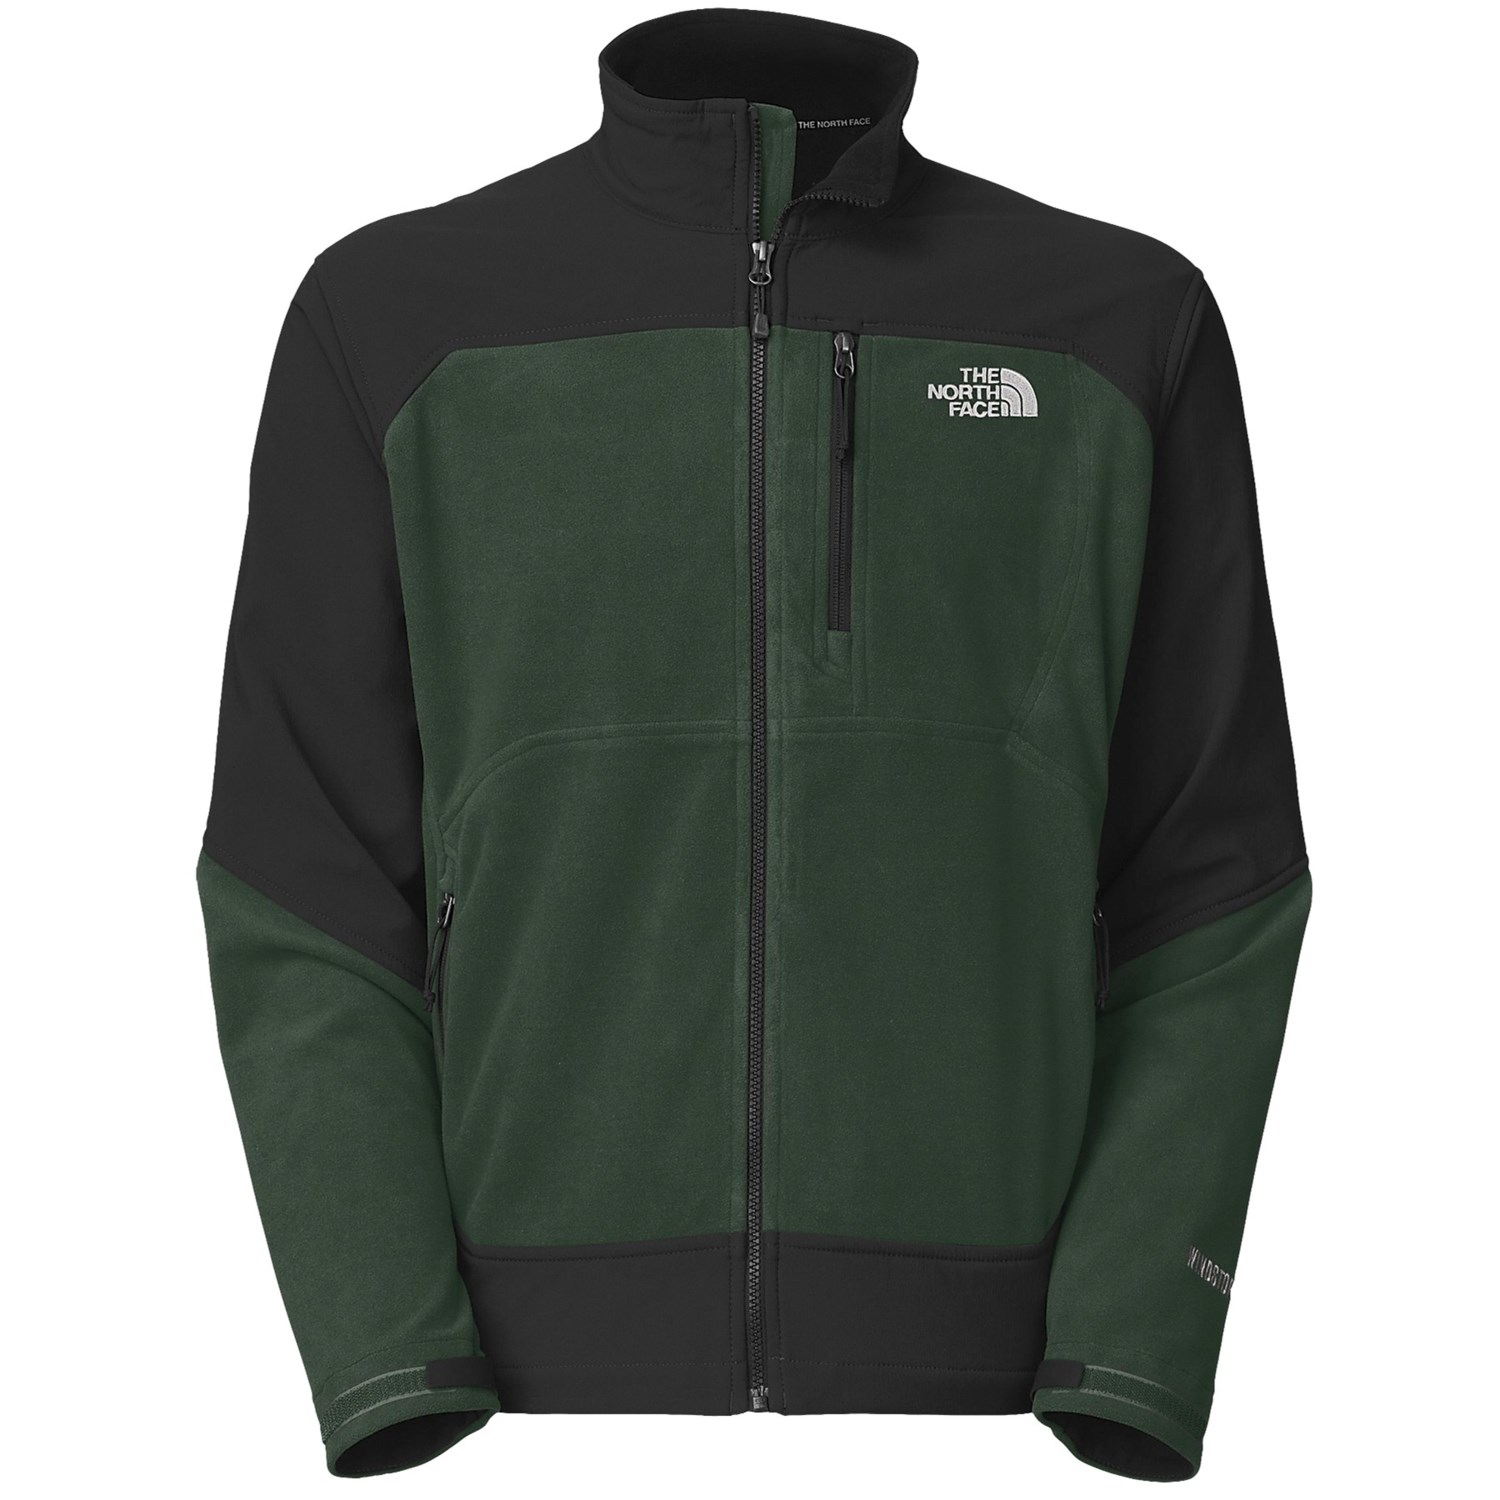 What is your go to North Face garment? | TigerDroppings.com